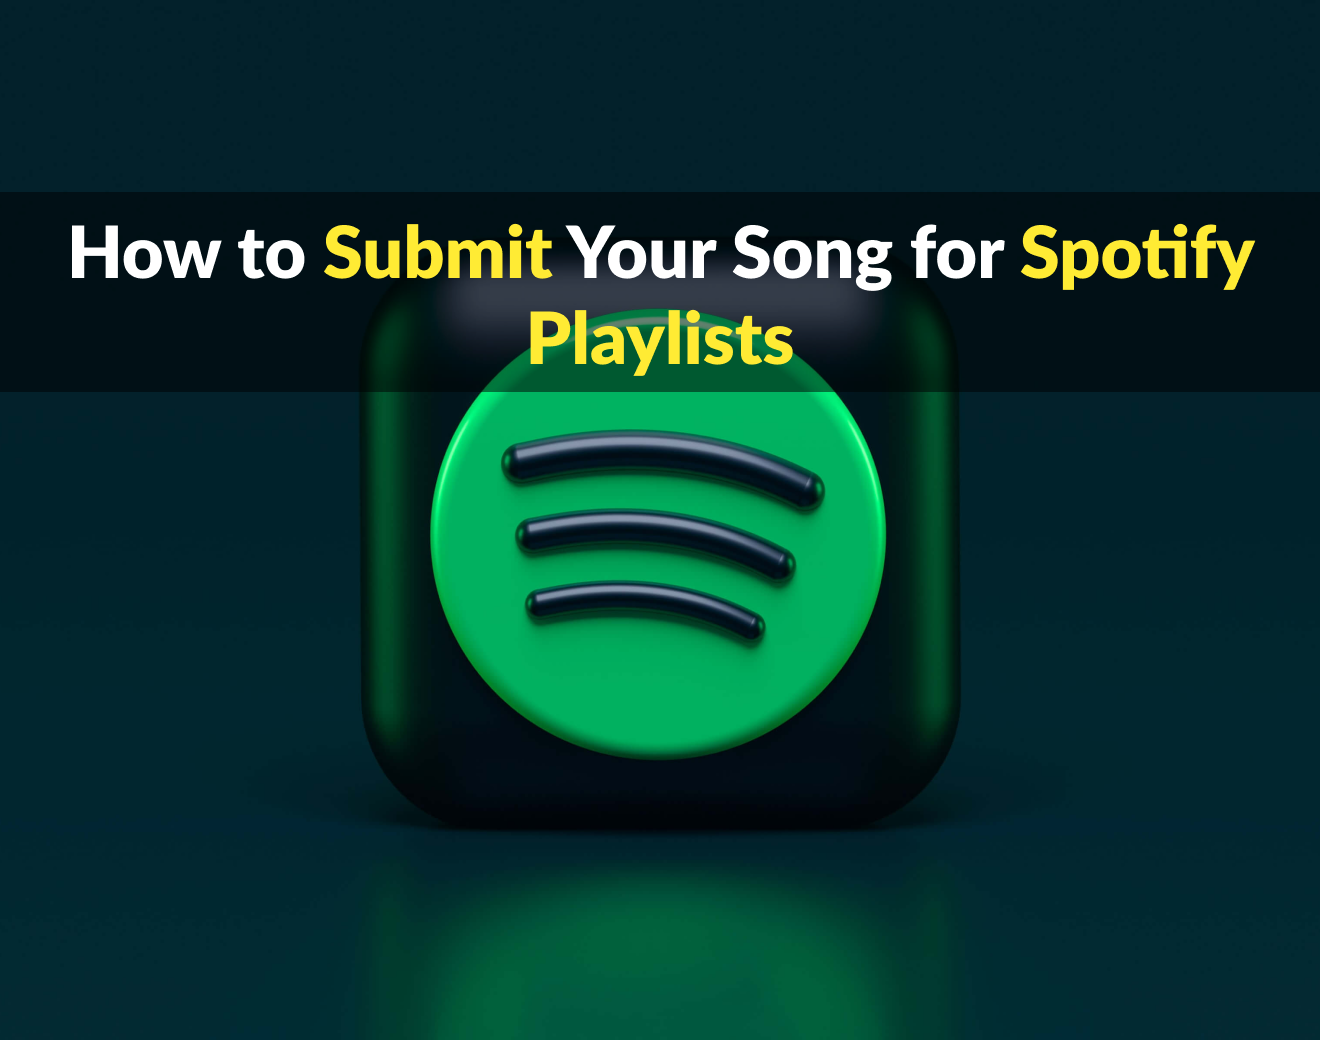 "How to Submit Your Song to Spotify Playlists" text over Spotify logo